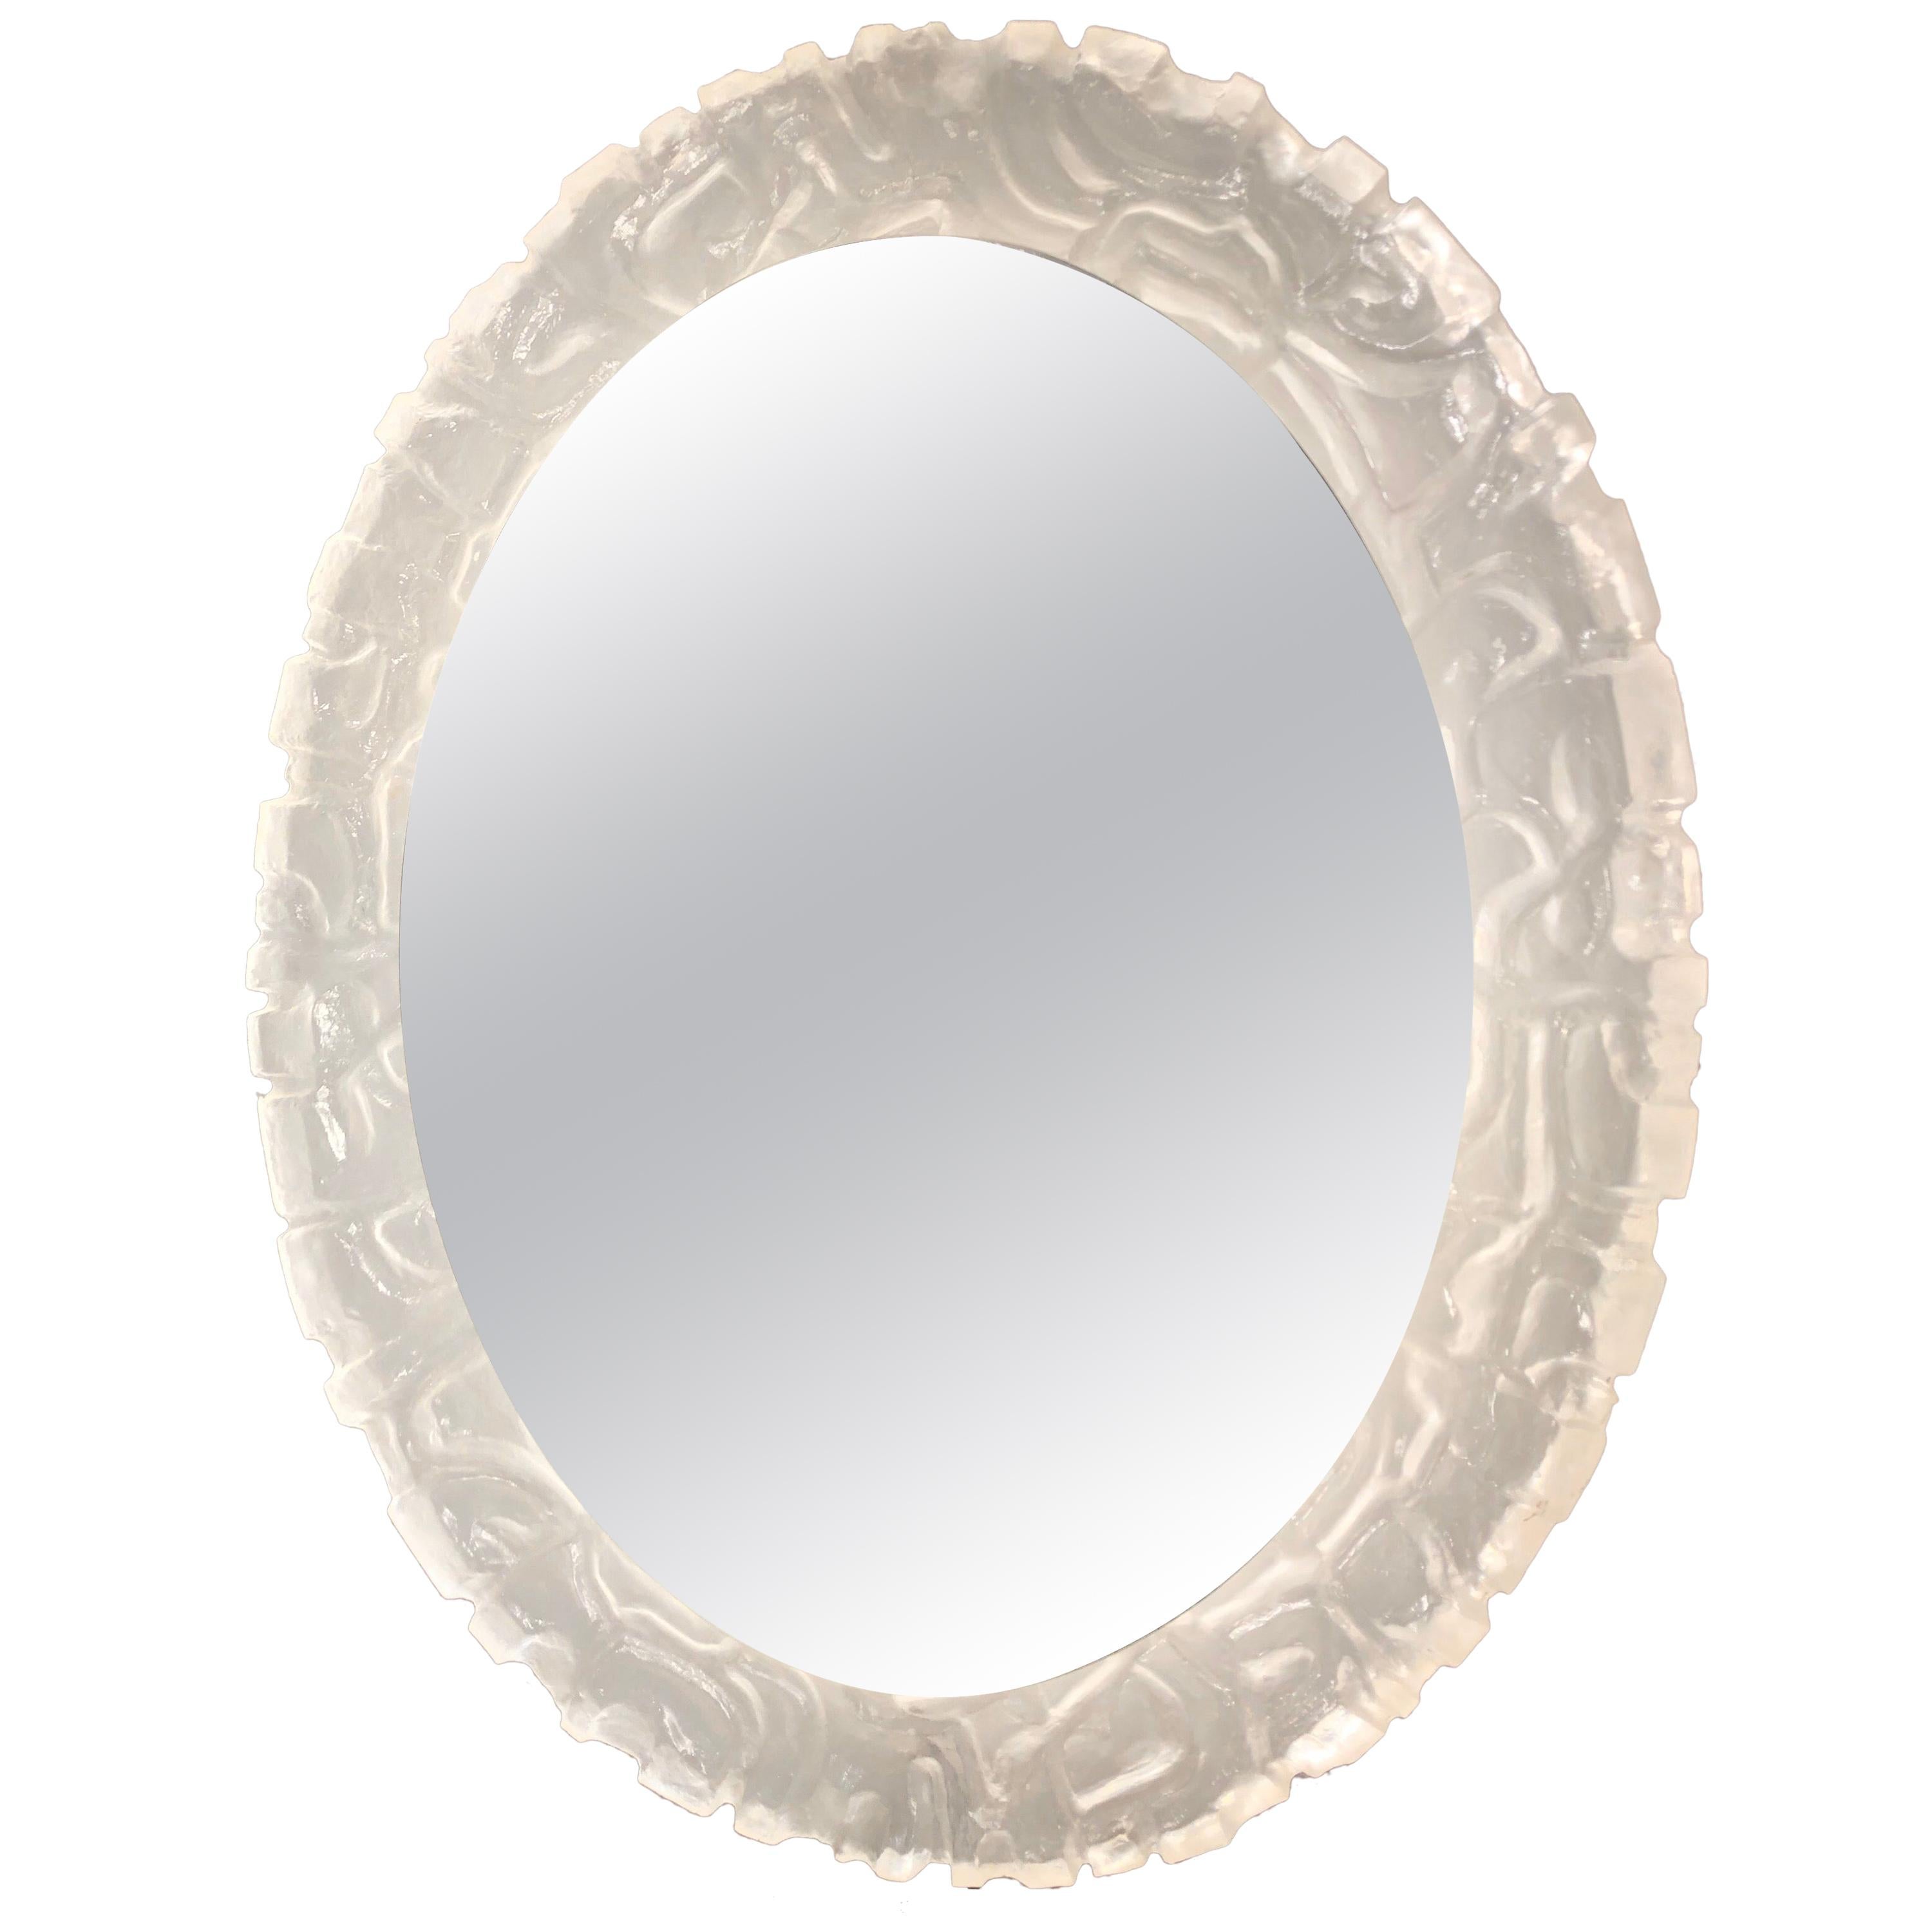 Large Illuminated Oval Wall Mirror in Lucite by Erco